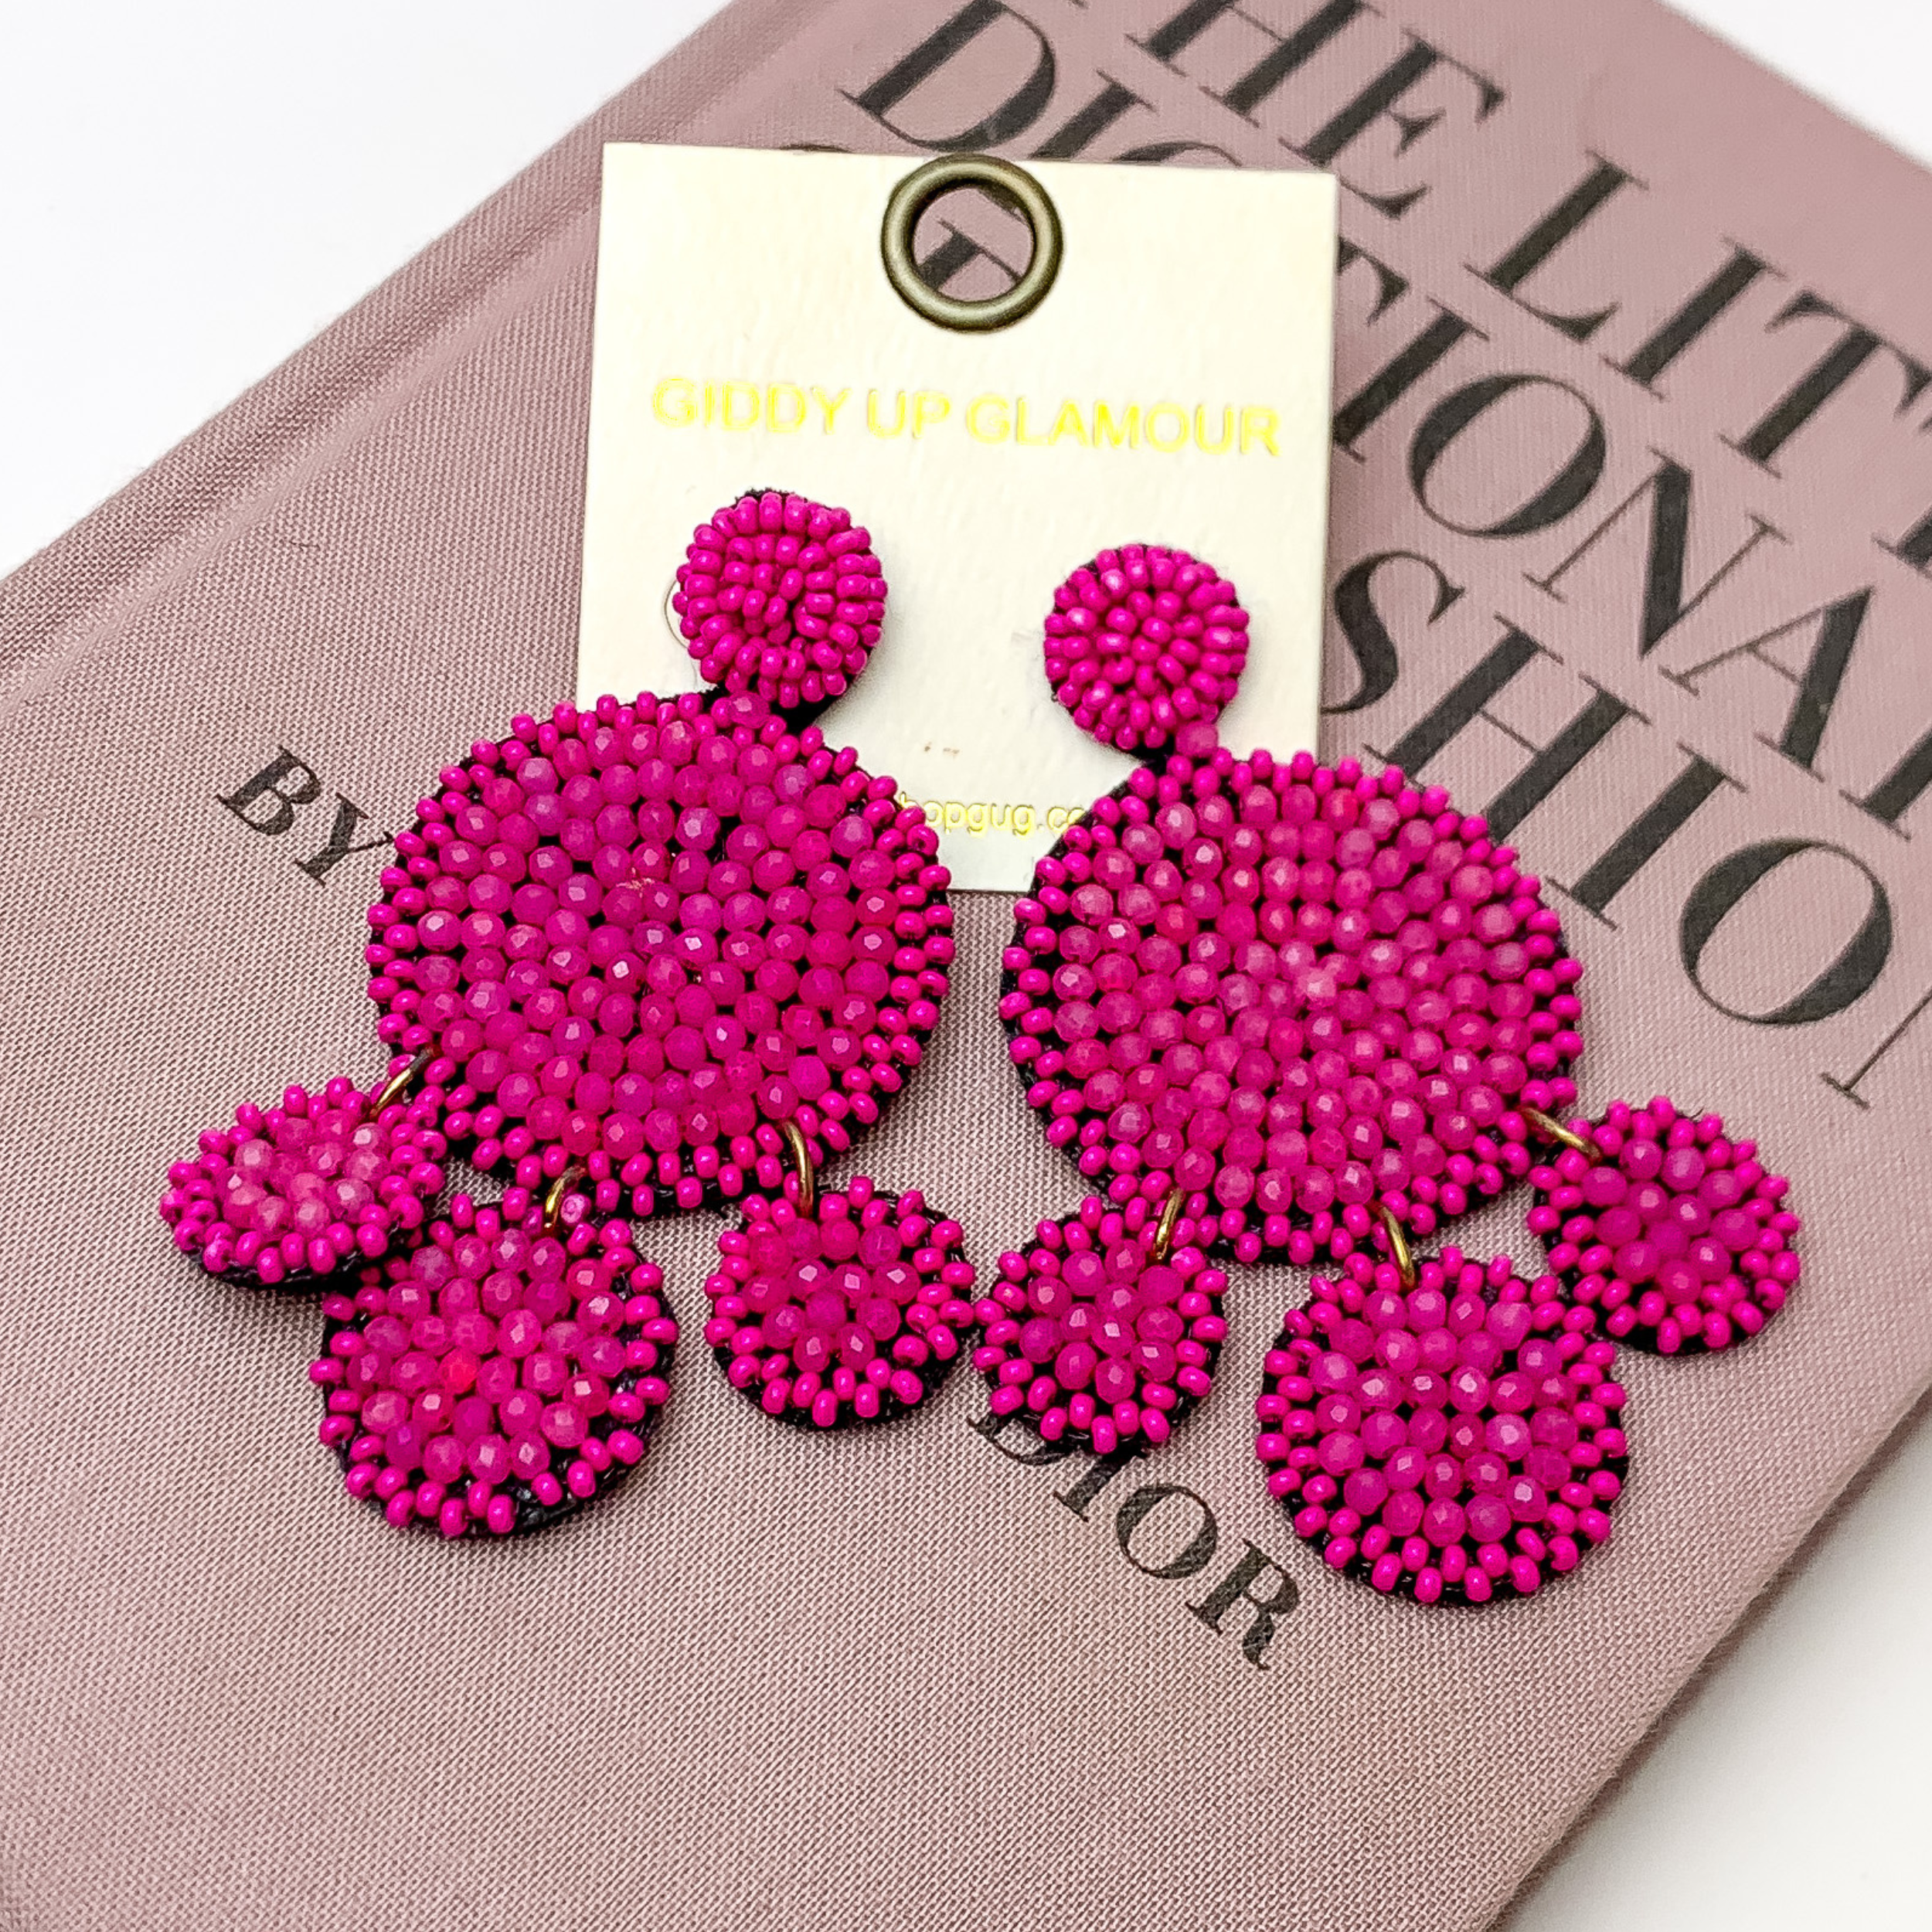 Beaded Circle Drop Statement Earrings in Fuchsia Pink - Giddy Up Glamour Boutique